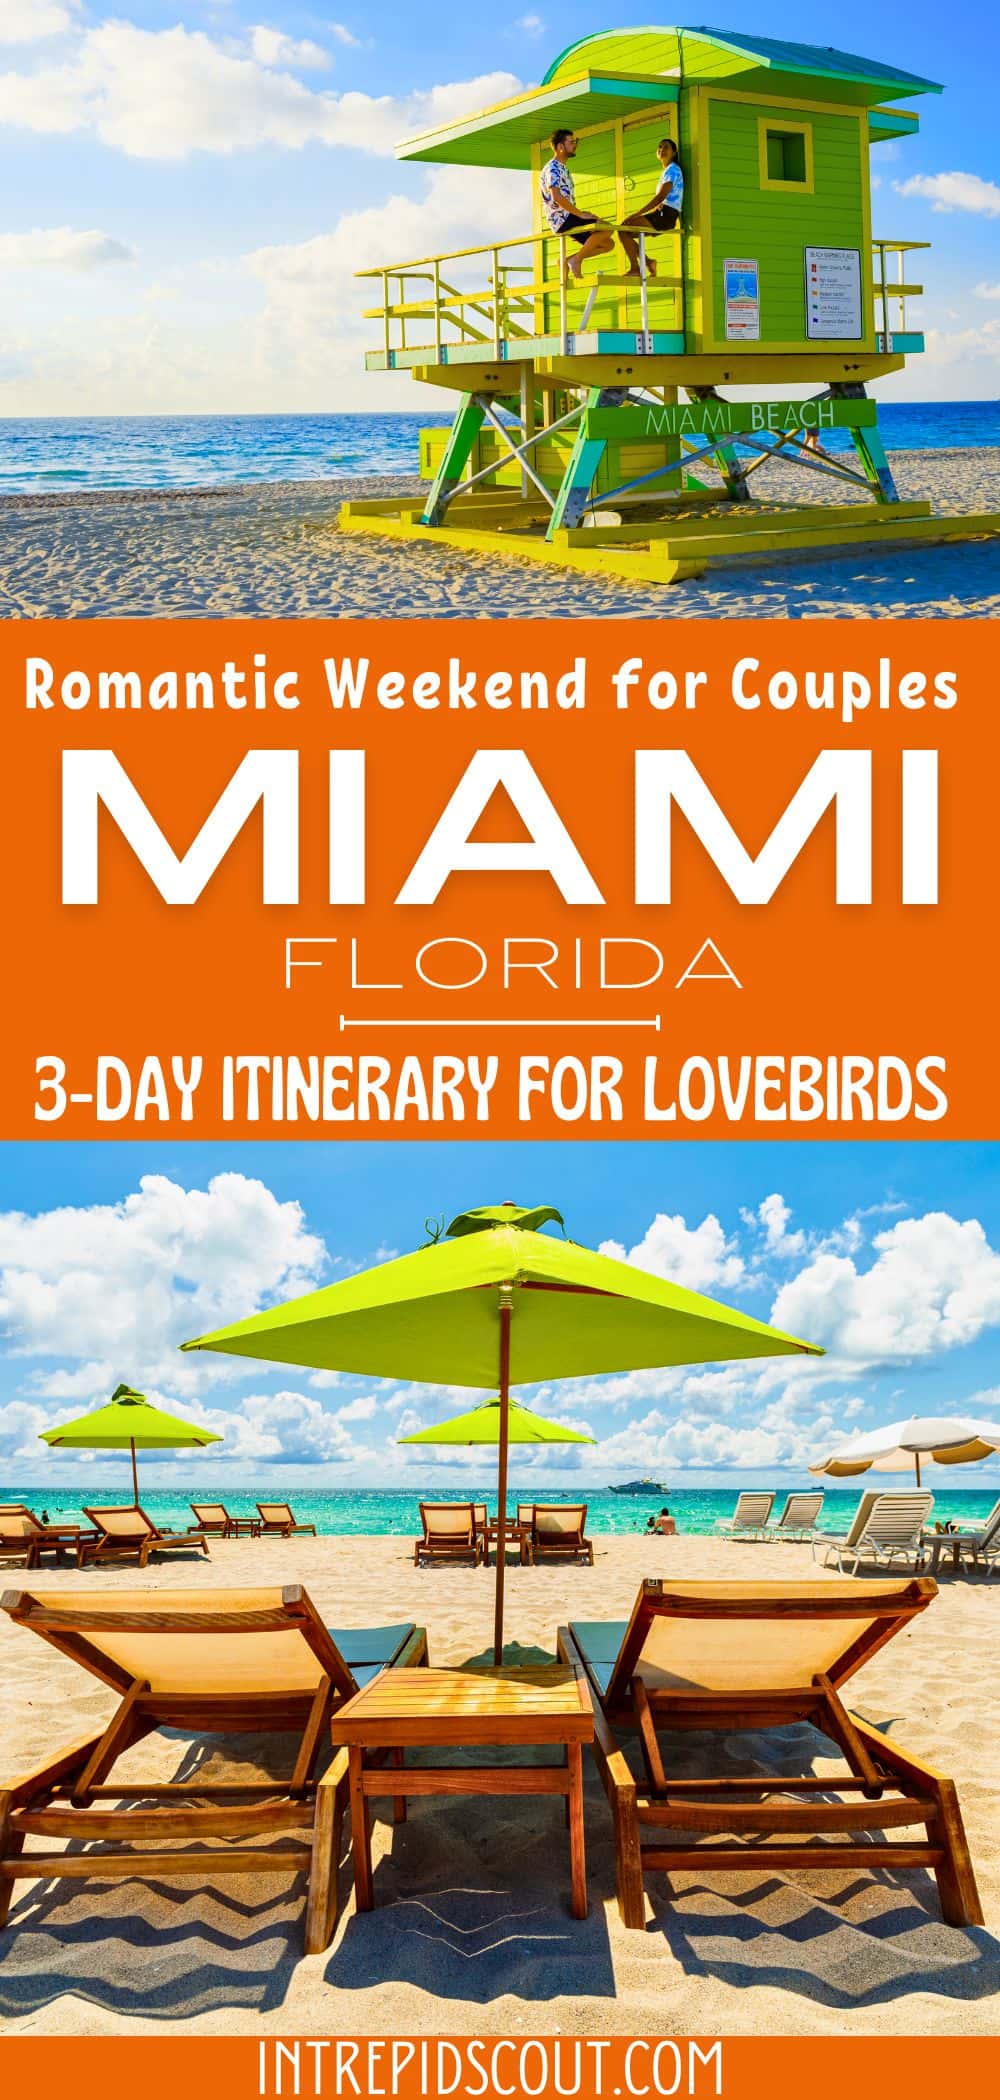 Romantic Weekend for Couples in Miami